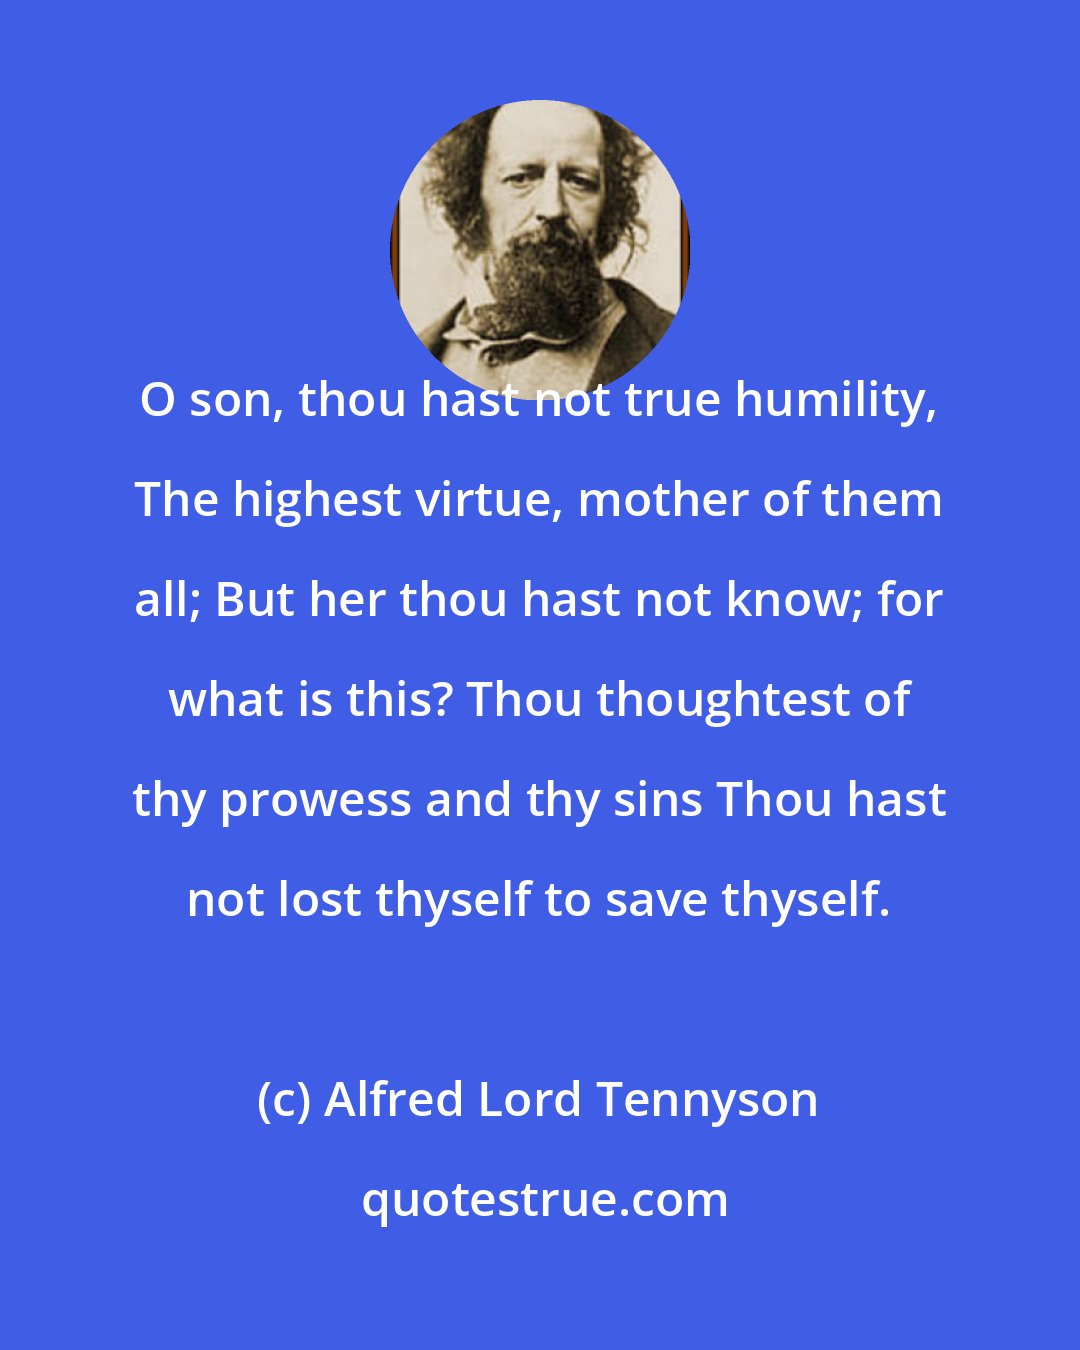 Alfred Lord Tennyson: O son, thou hast not true humility, The highest virtue, mother of them all; But her thou hast not know; for what is this? Thou thoughtest of thy prowess and thy sins Thou hast not lost thyself to save thyself.